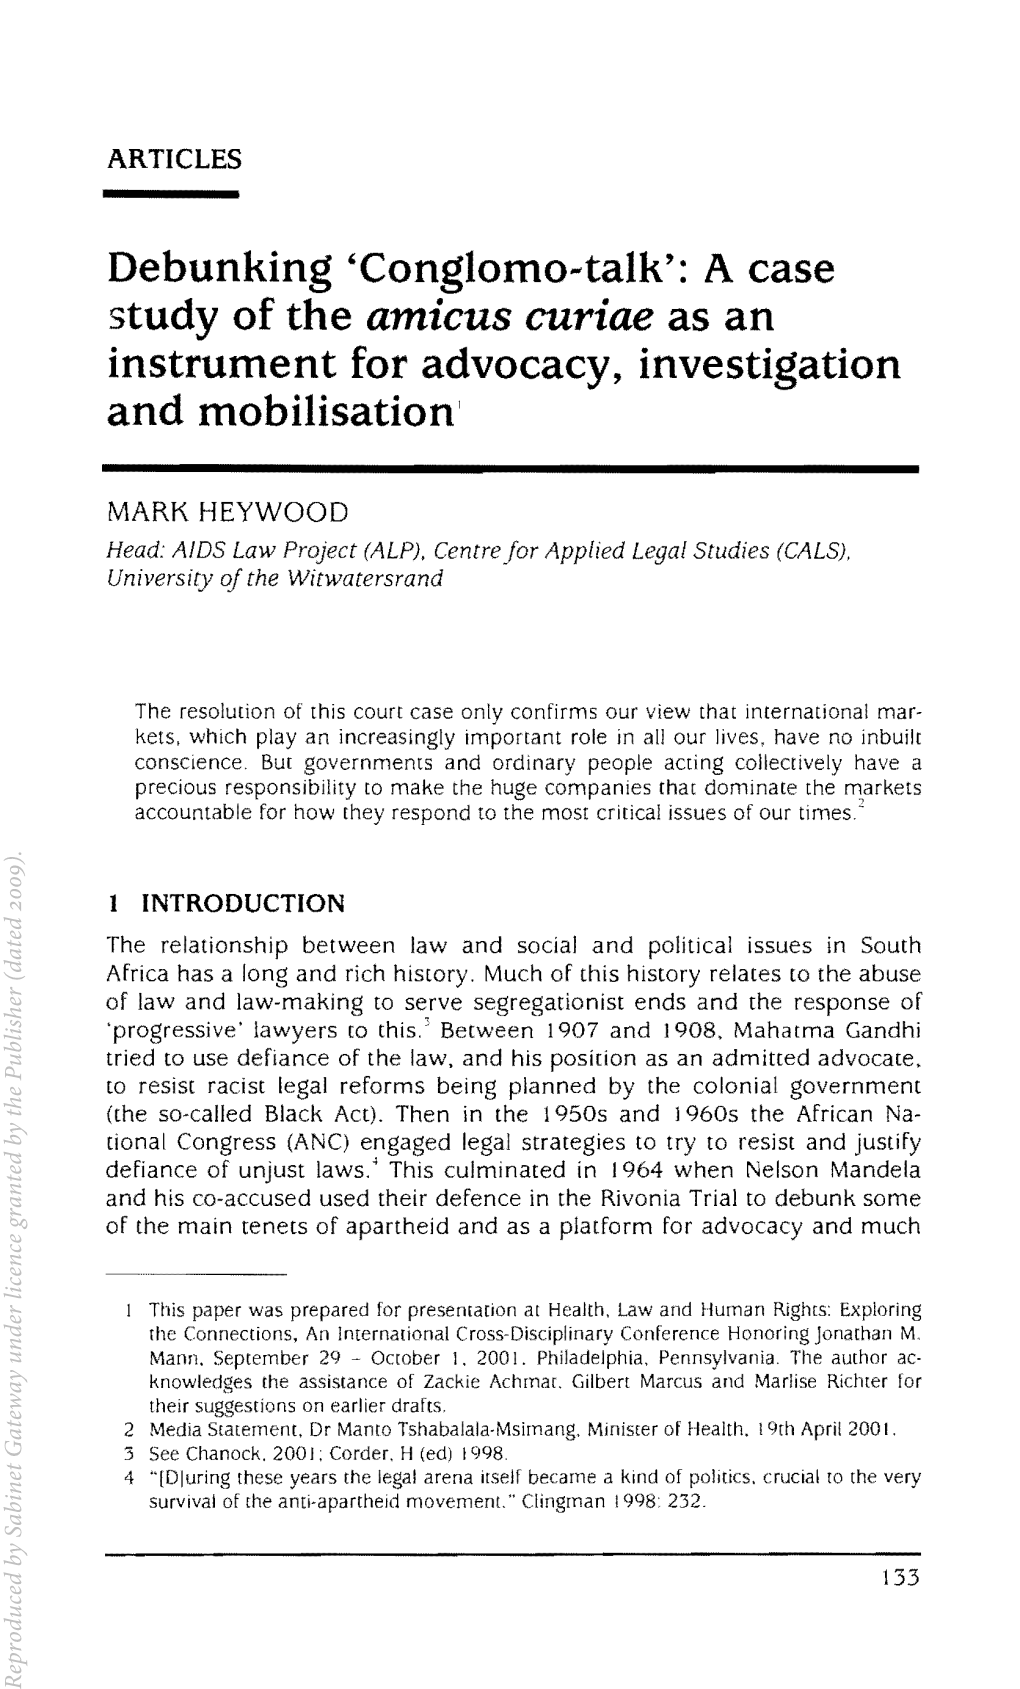 Debunking 'Conglomo-Talk': a Case Study of the Amicus Curiae As an Instrument for Advocacy, Investigation and Mobilisation'